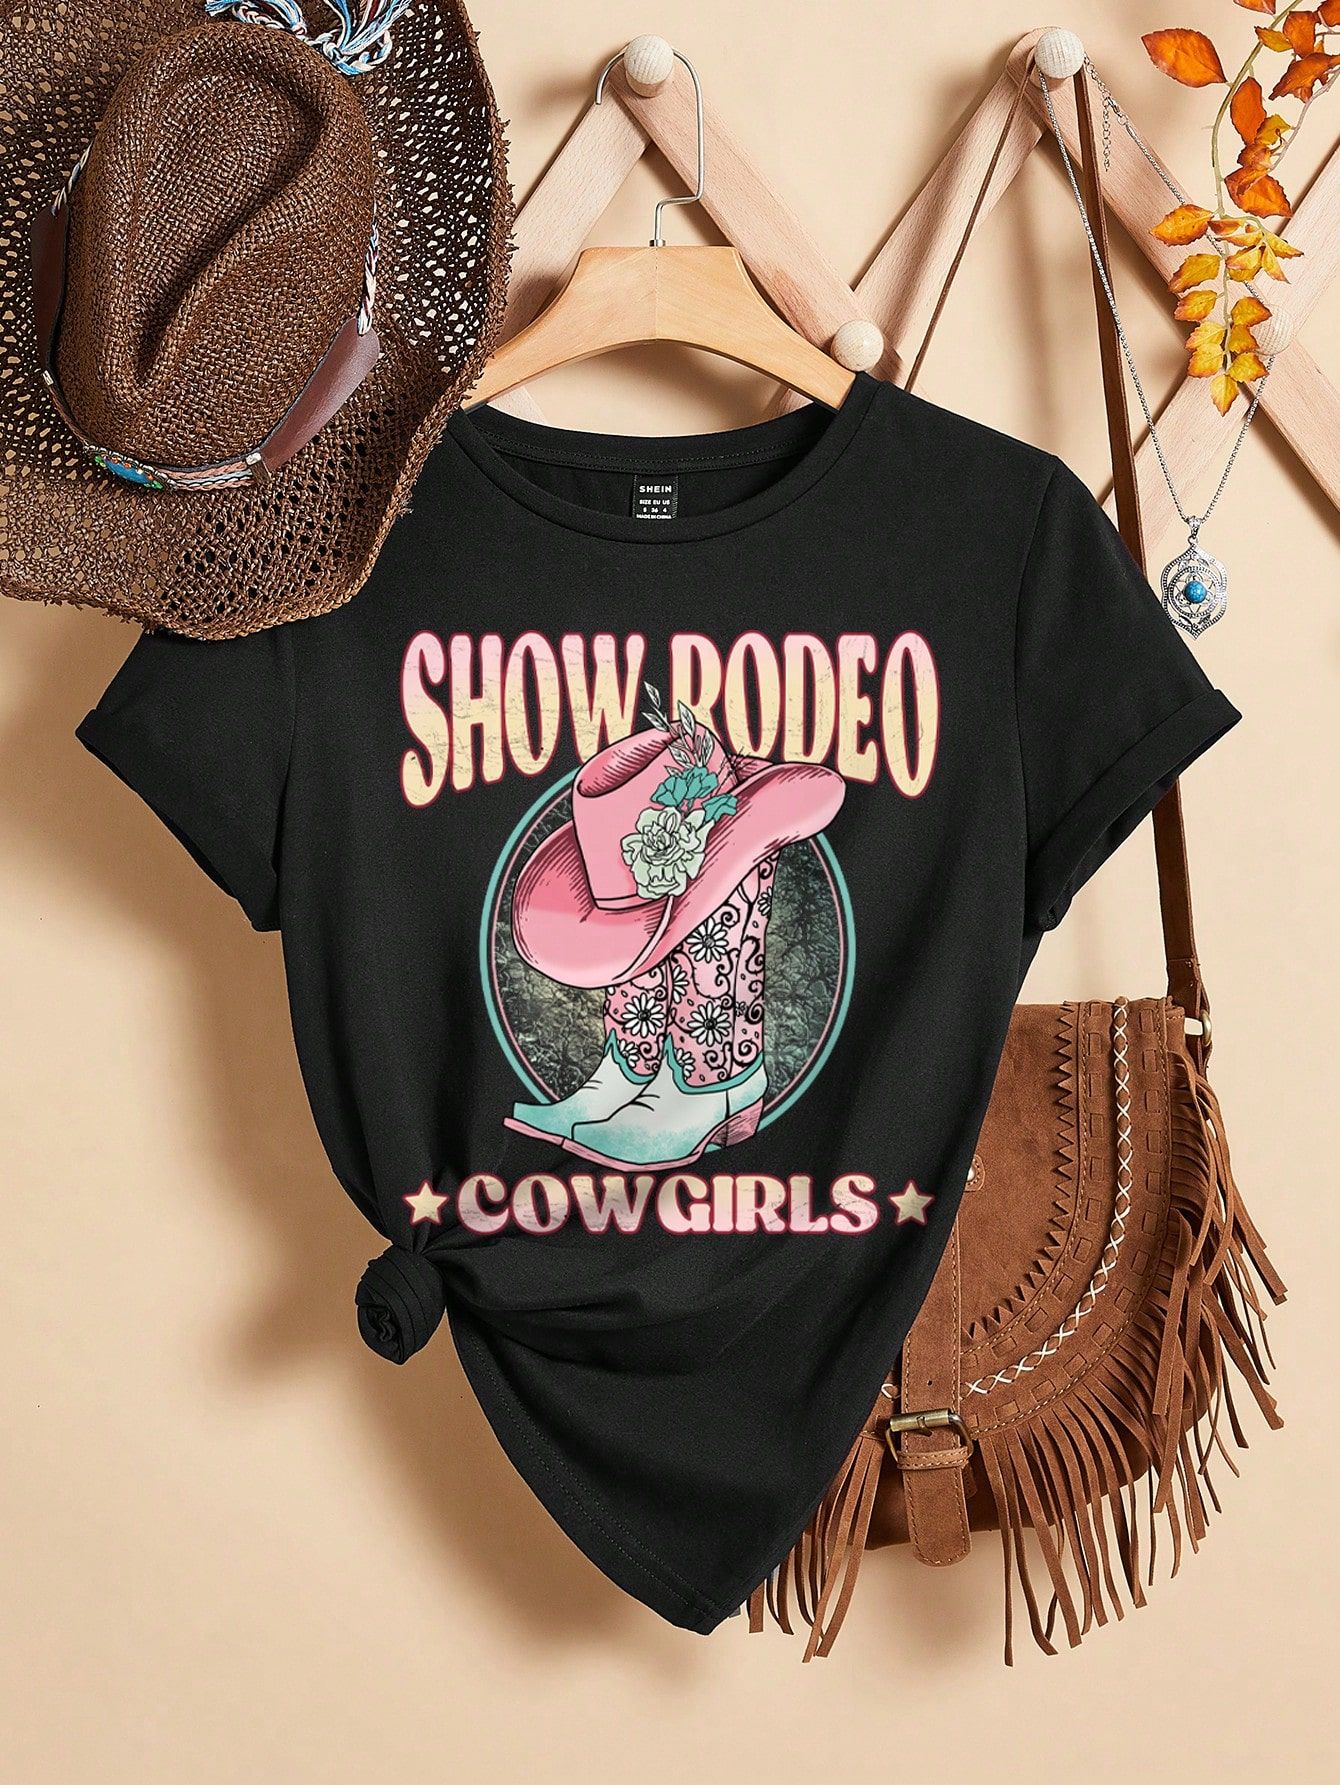 SHEIN LUNE Letter & Cowgirl Boots Print Tee | SHEIN